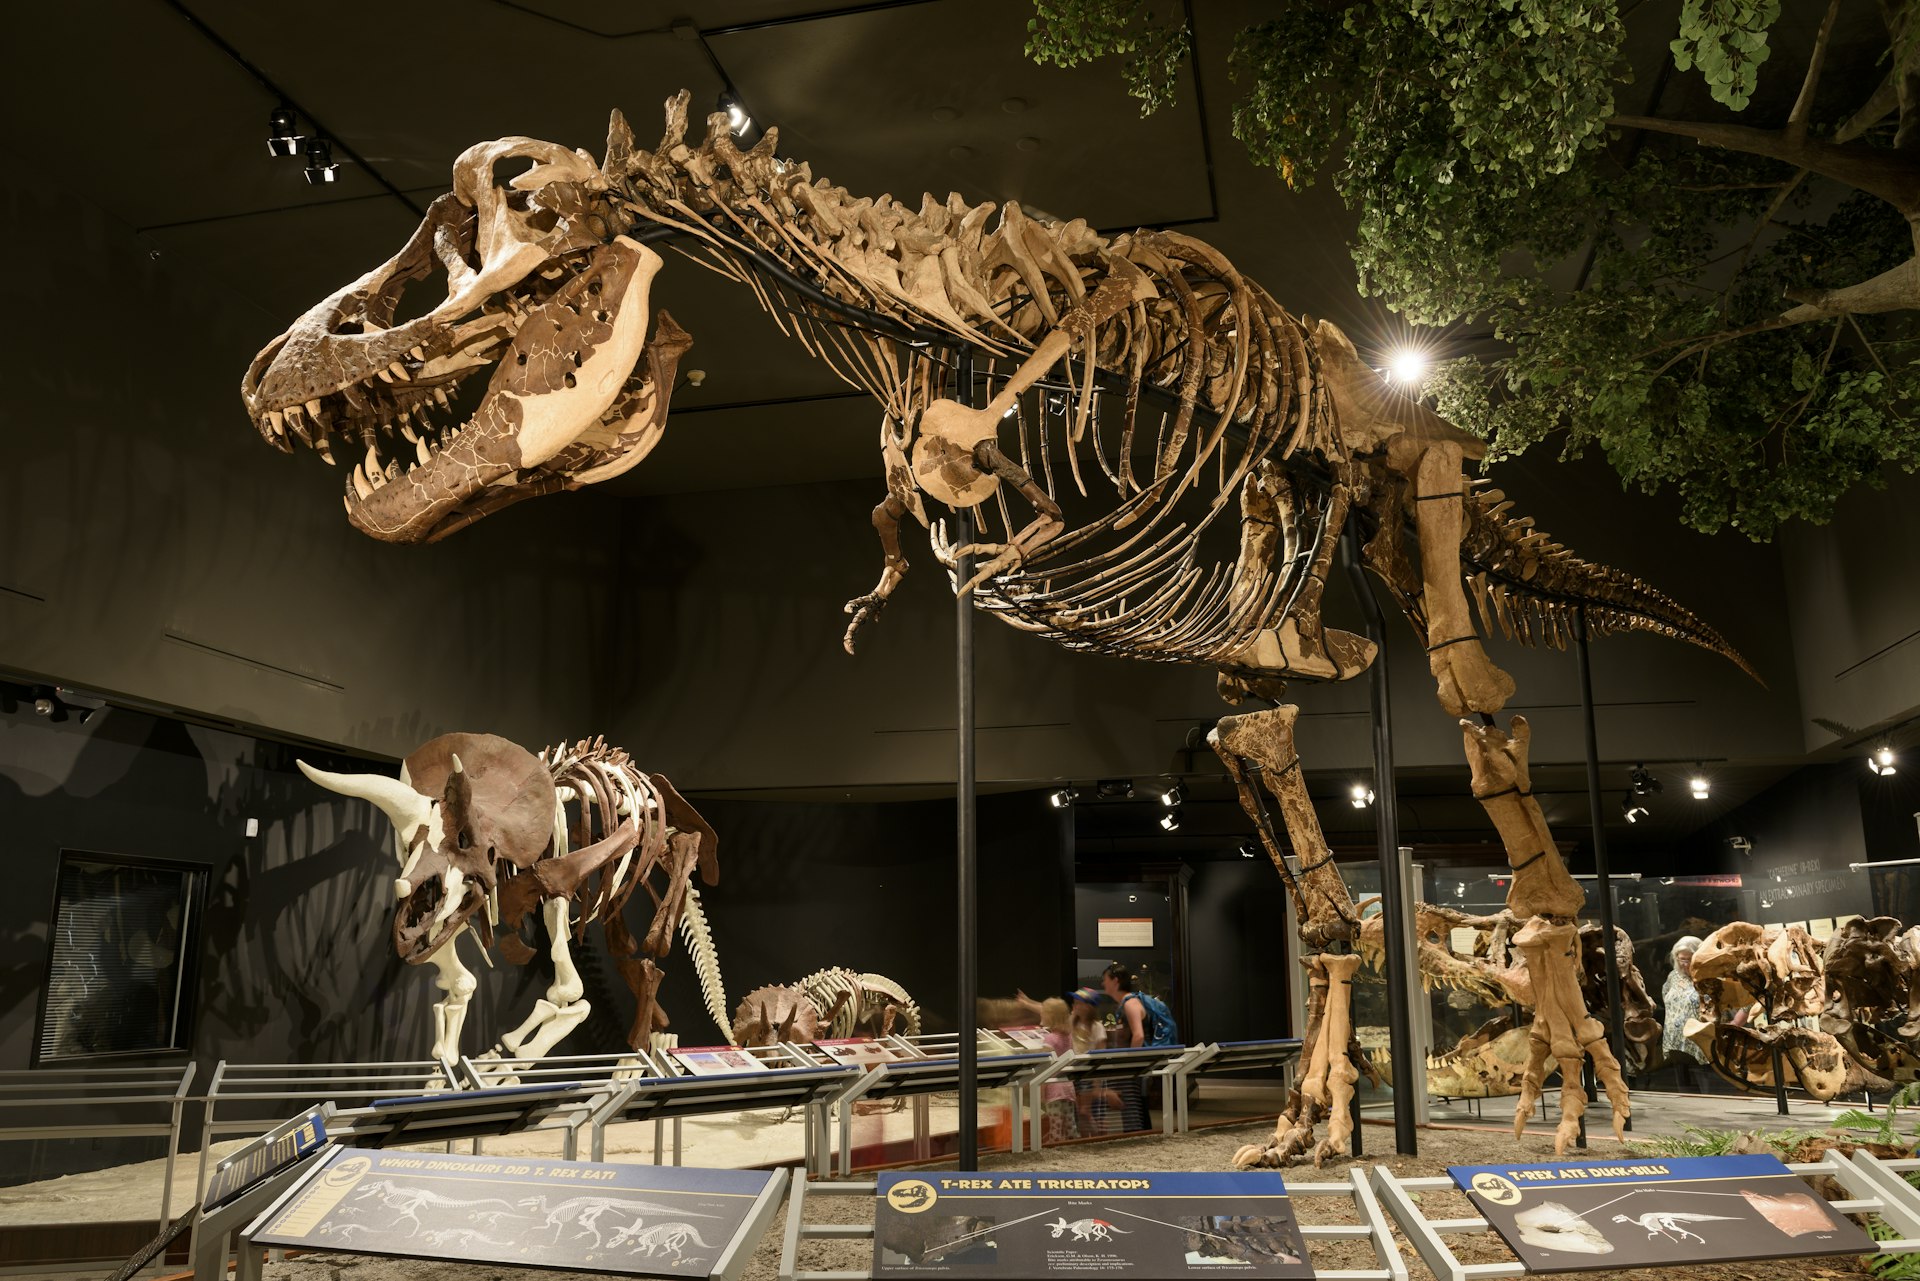 A Tyrannosaurus skeleton on display at the Museum of the Rockies, Bozeman